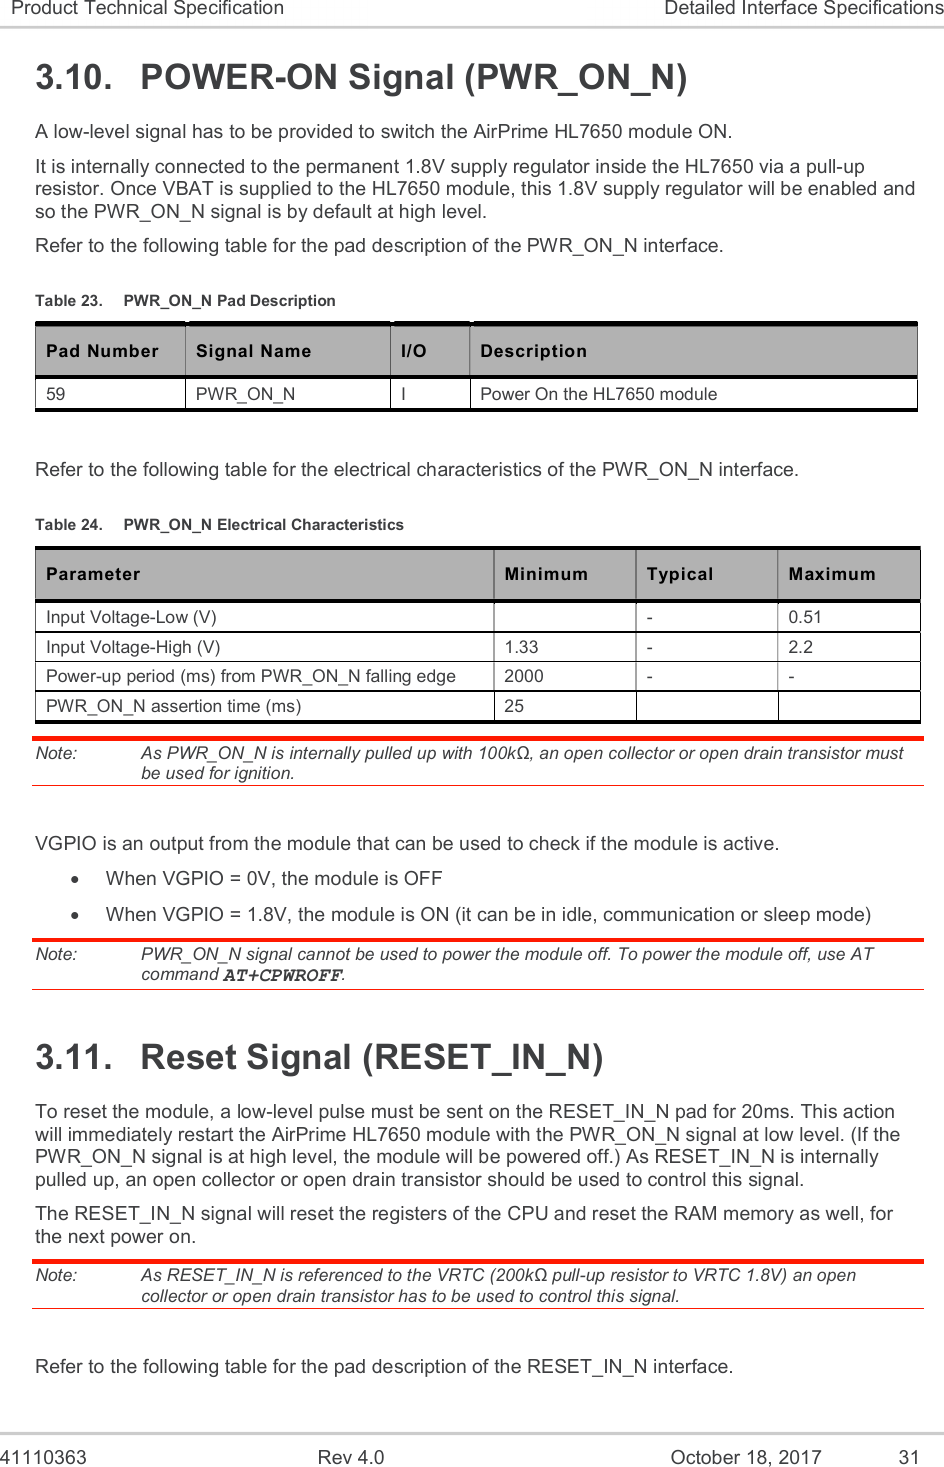   41110363  Rev 4.0  October 18, 2017  31 Product Technical Specification  Detailed Interface Specifications 3.10.  POWER-ON Signal (PWR_ON_N) A low-level signal has to be provided to switch the AirPrime HL7650 module ON. It is internally connected to the permanent 1.8V supply regulator inside the HL7650 via a pull-up resistor. Once VBAT is supplied to the HL7650 module, this 1.8V supply regulator will be enabled and so the PWR_ON_N signal is by default at high level. Refer to the following table for the pad description of the PWR_ON_N interface. Table 23.  PWR_ON_N Pad Description Pad Number Signal Name I/O Description 59  PWR_ON_N  I  Power On the HL7650 module   Refer to the following table for the electrical characteristics of the PWR_ON_N interface. Table 24.  PWR_ON_N Electrical Characteristics Parameter  Minimum  Typical  Maximum Input Voltage-Low (V)    -  0.51 Input Voltage-High (V)  1.33  -  2.2 Power-up period (ms) from PWR_ON_N falling edge   2000  -  - PWR_ON_N assertion time (ms)  25     Note:   As PWR_ON_N is internally pulled up with 100kΩ, an open collector or open drain transistor must be used for ignition.  VGPIO is an output from the module that can be used to check if the module is active.   When VGPIO = 0V, the module is OFF   When VGPIO = 1.8V, the module is ON (it can be in idle, communication or sleep mode) Note:   PWR_ON_N signal cannot be used to power the module off. To power the module off, use AT command AT+CPWROFF. 3.11.  Reset Signal (RESET_IN_N) To reset the module, a low-level pulse must be sent on the RESET_IN_N pad for 20ms. This action will immediately restart the AirPrime HL7650 module with the PWR_ON_N signal at low level. (If the PWR_ON_N signal is at high level, the module will be powered off.) As RESET_IN_N is internally pulled up, an open collector or open drain transistor should be used to control this signal. The RESET_IN_N signal will reset the registers of the CPU and reset the RAM memory as well, for the next power on. Note:   As RESET_IN_N is referenced to the VRTC (200kΩ pull-up resistor to VRTC 1.8V) an open collector or open drain transistor has to be used to control this signal.  Refer to the following table for the pad description of the RESET_IN_N interface. 